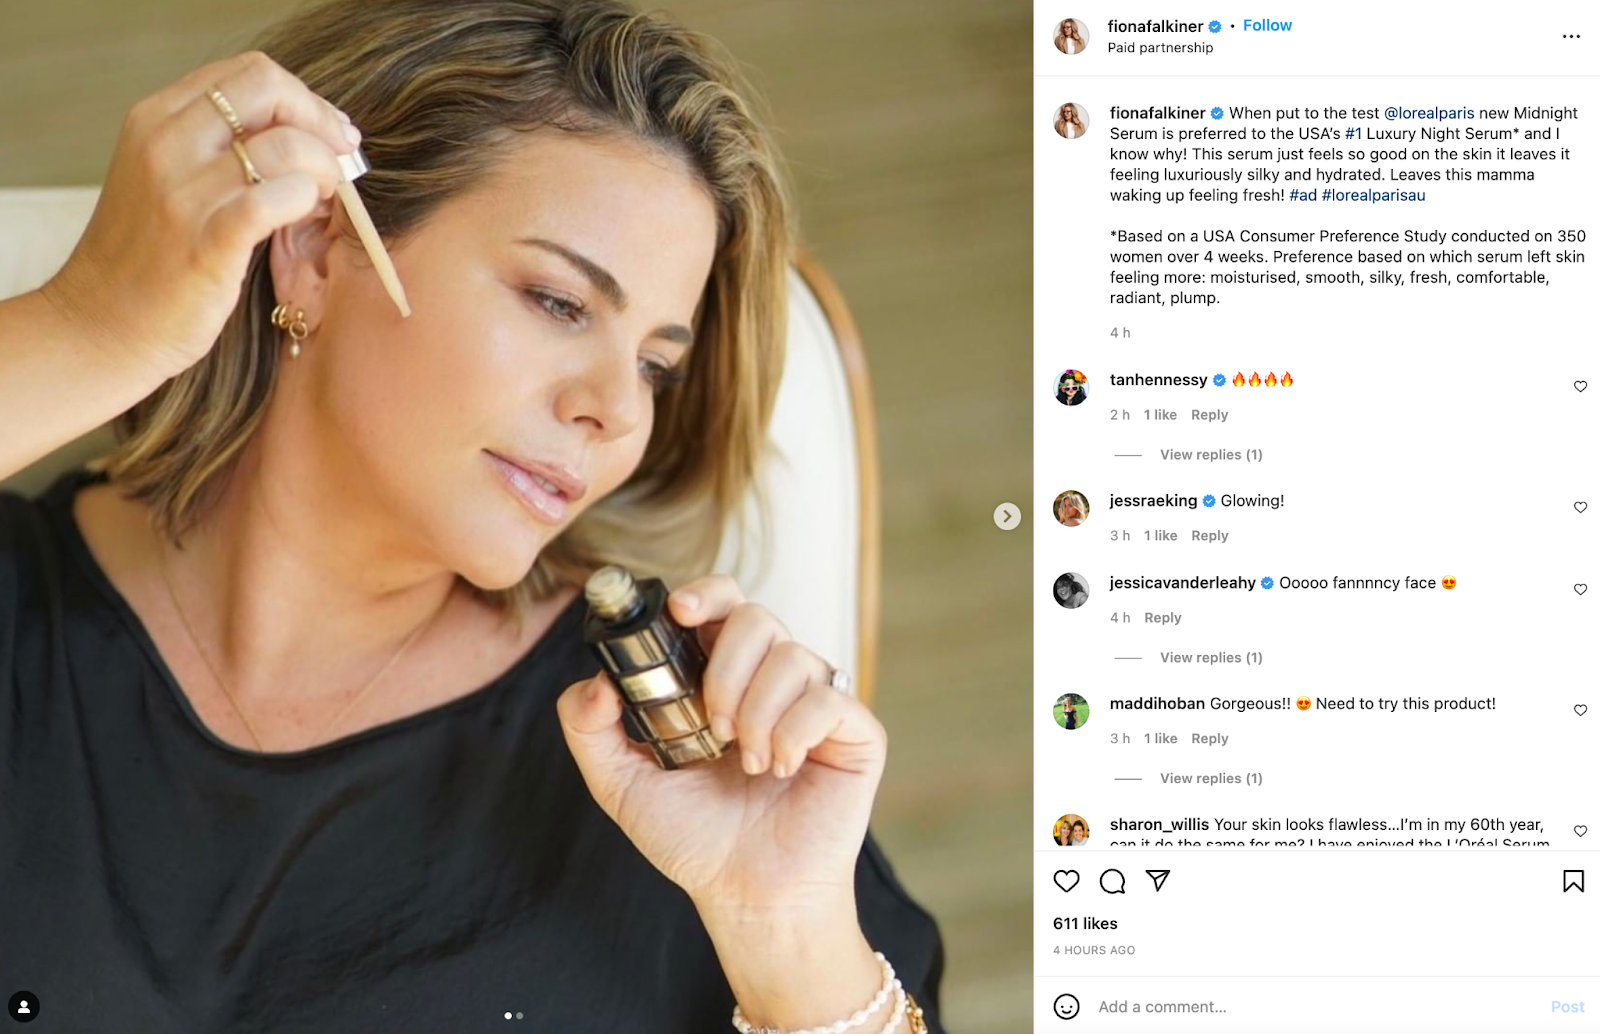 An influencer marketing post on Instagram with Fiona Falkiner and L'Oreal Paris